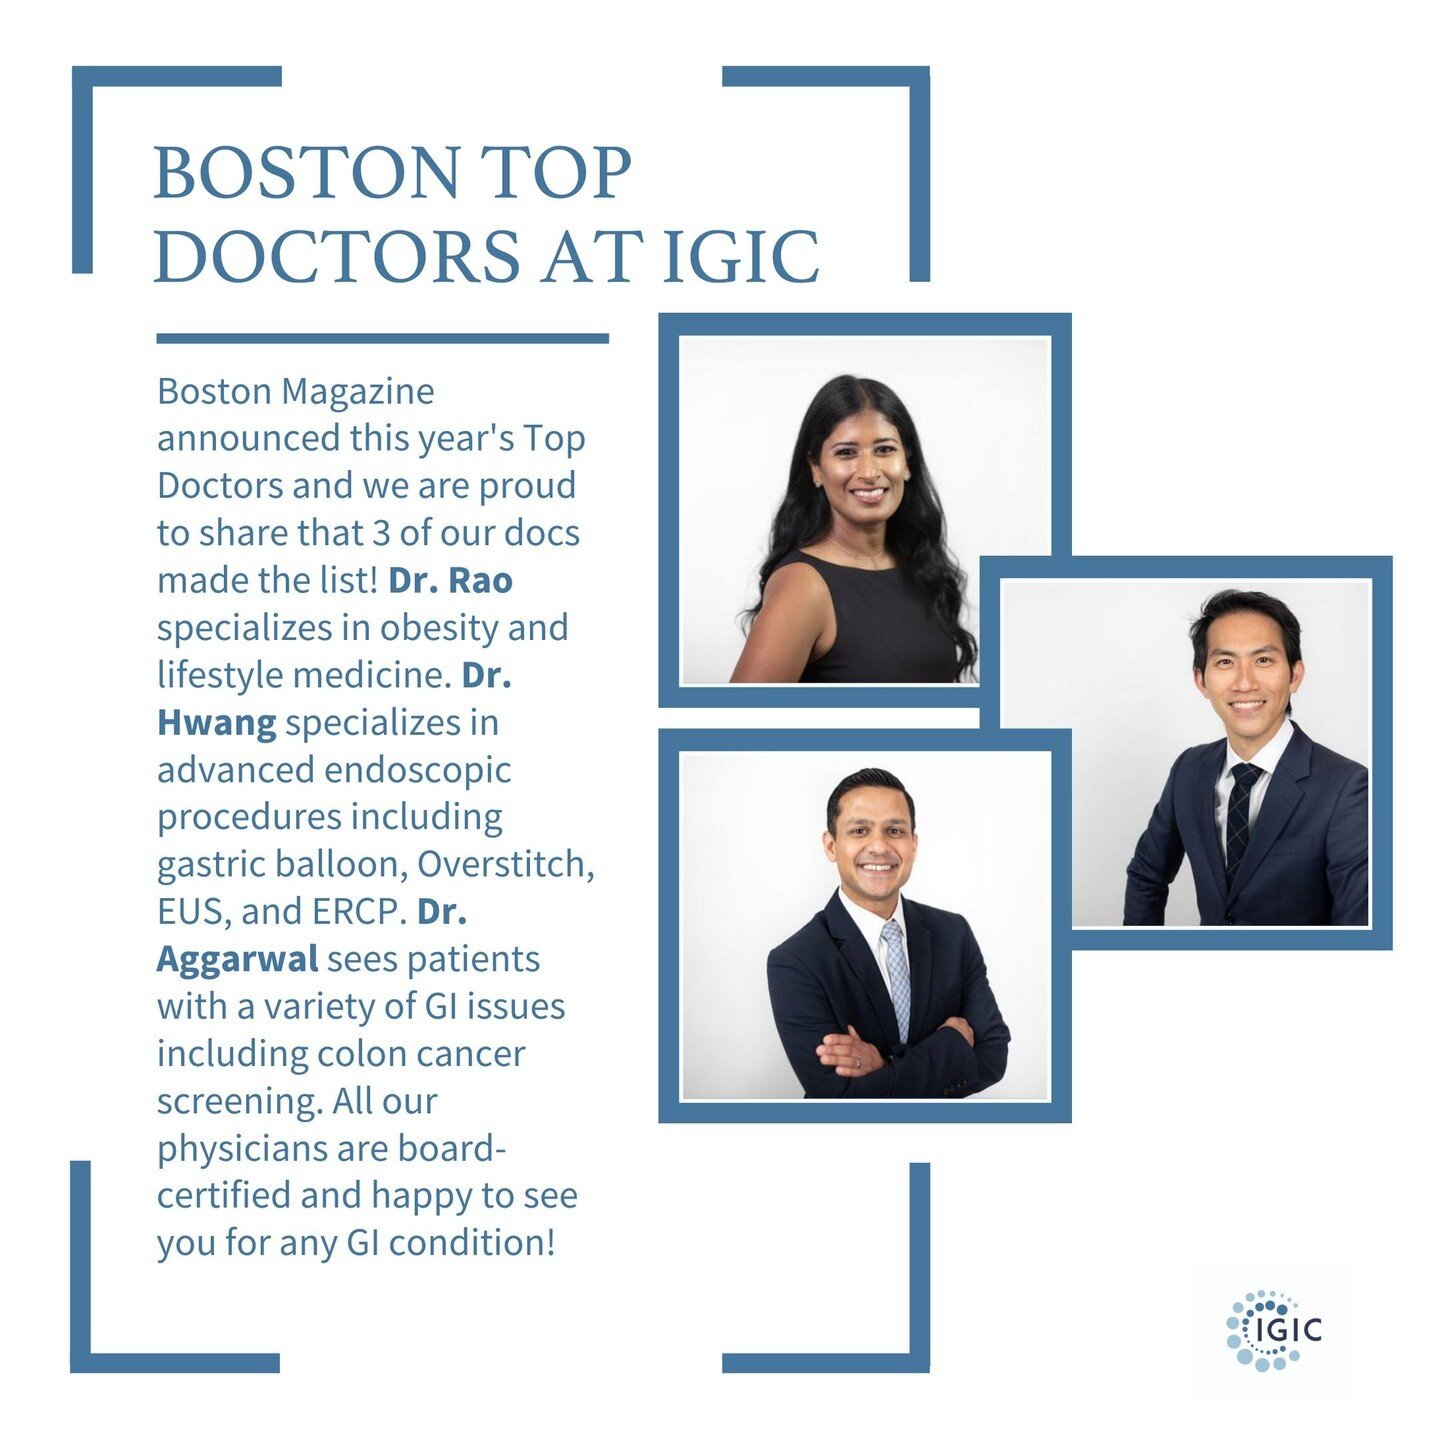 📣 @bostonmagazine announced this year's #TopDoctors and we are proud to share that 3 of our docs made the list!⁠
⁠
🌿 Dr. Rao @gutsygirlmd specializes in obesity and lifestyle medicine.⁠
🏥 Dr. Hwang specializes in advanced endoscopic procedures inc